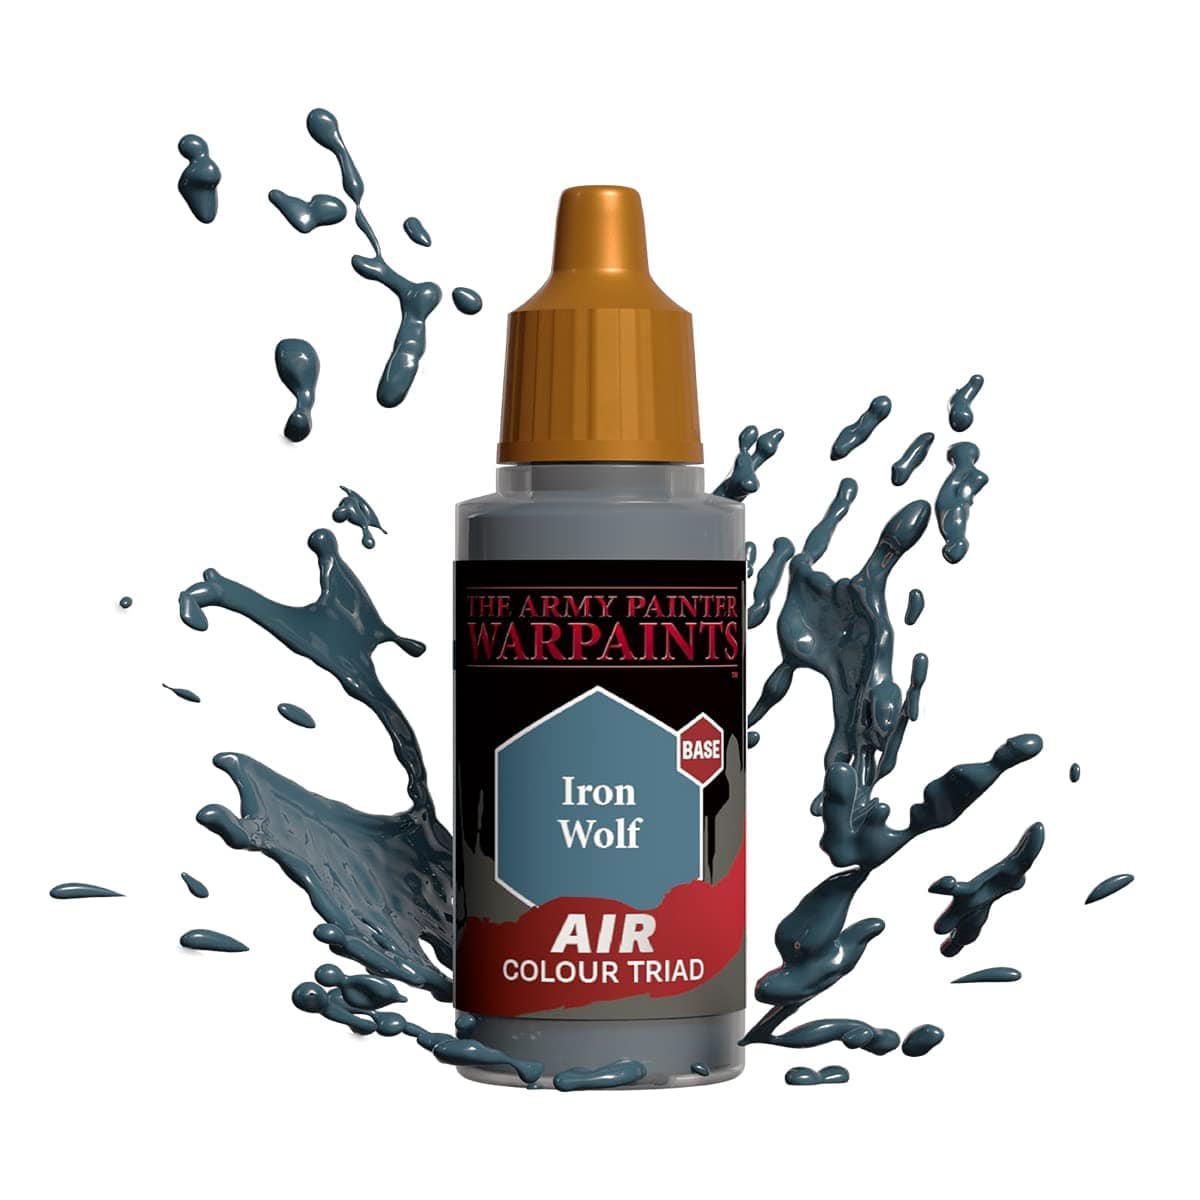 The Army Painter Accessories The Army Painter Warpaints Air: Iron Wolf 18ml